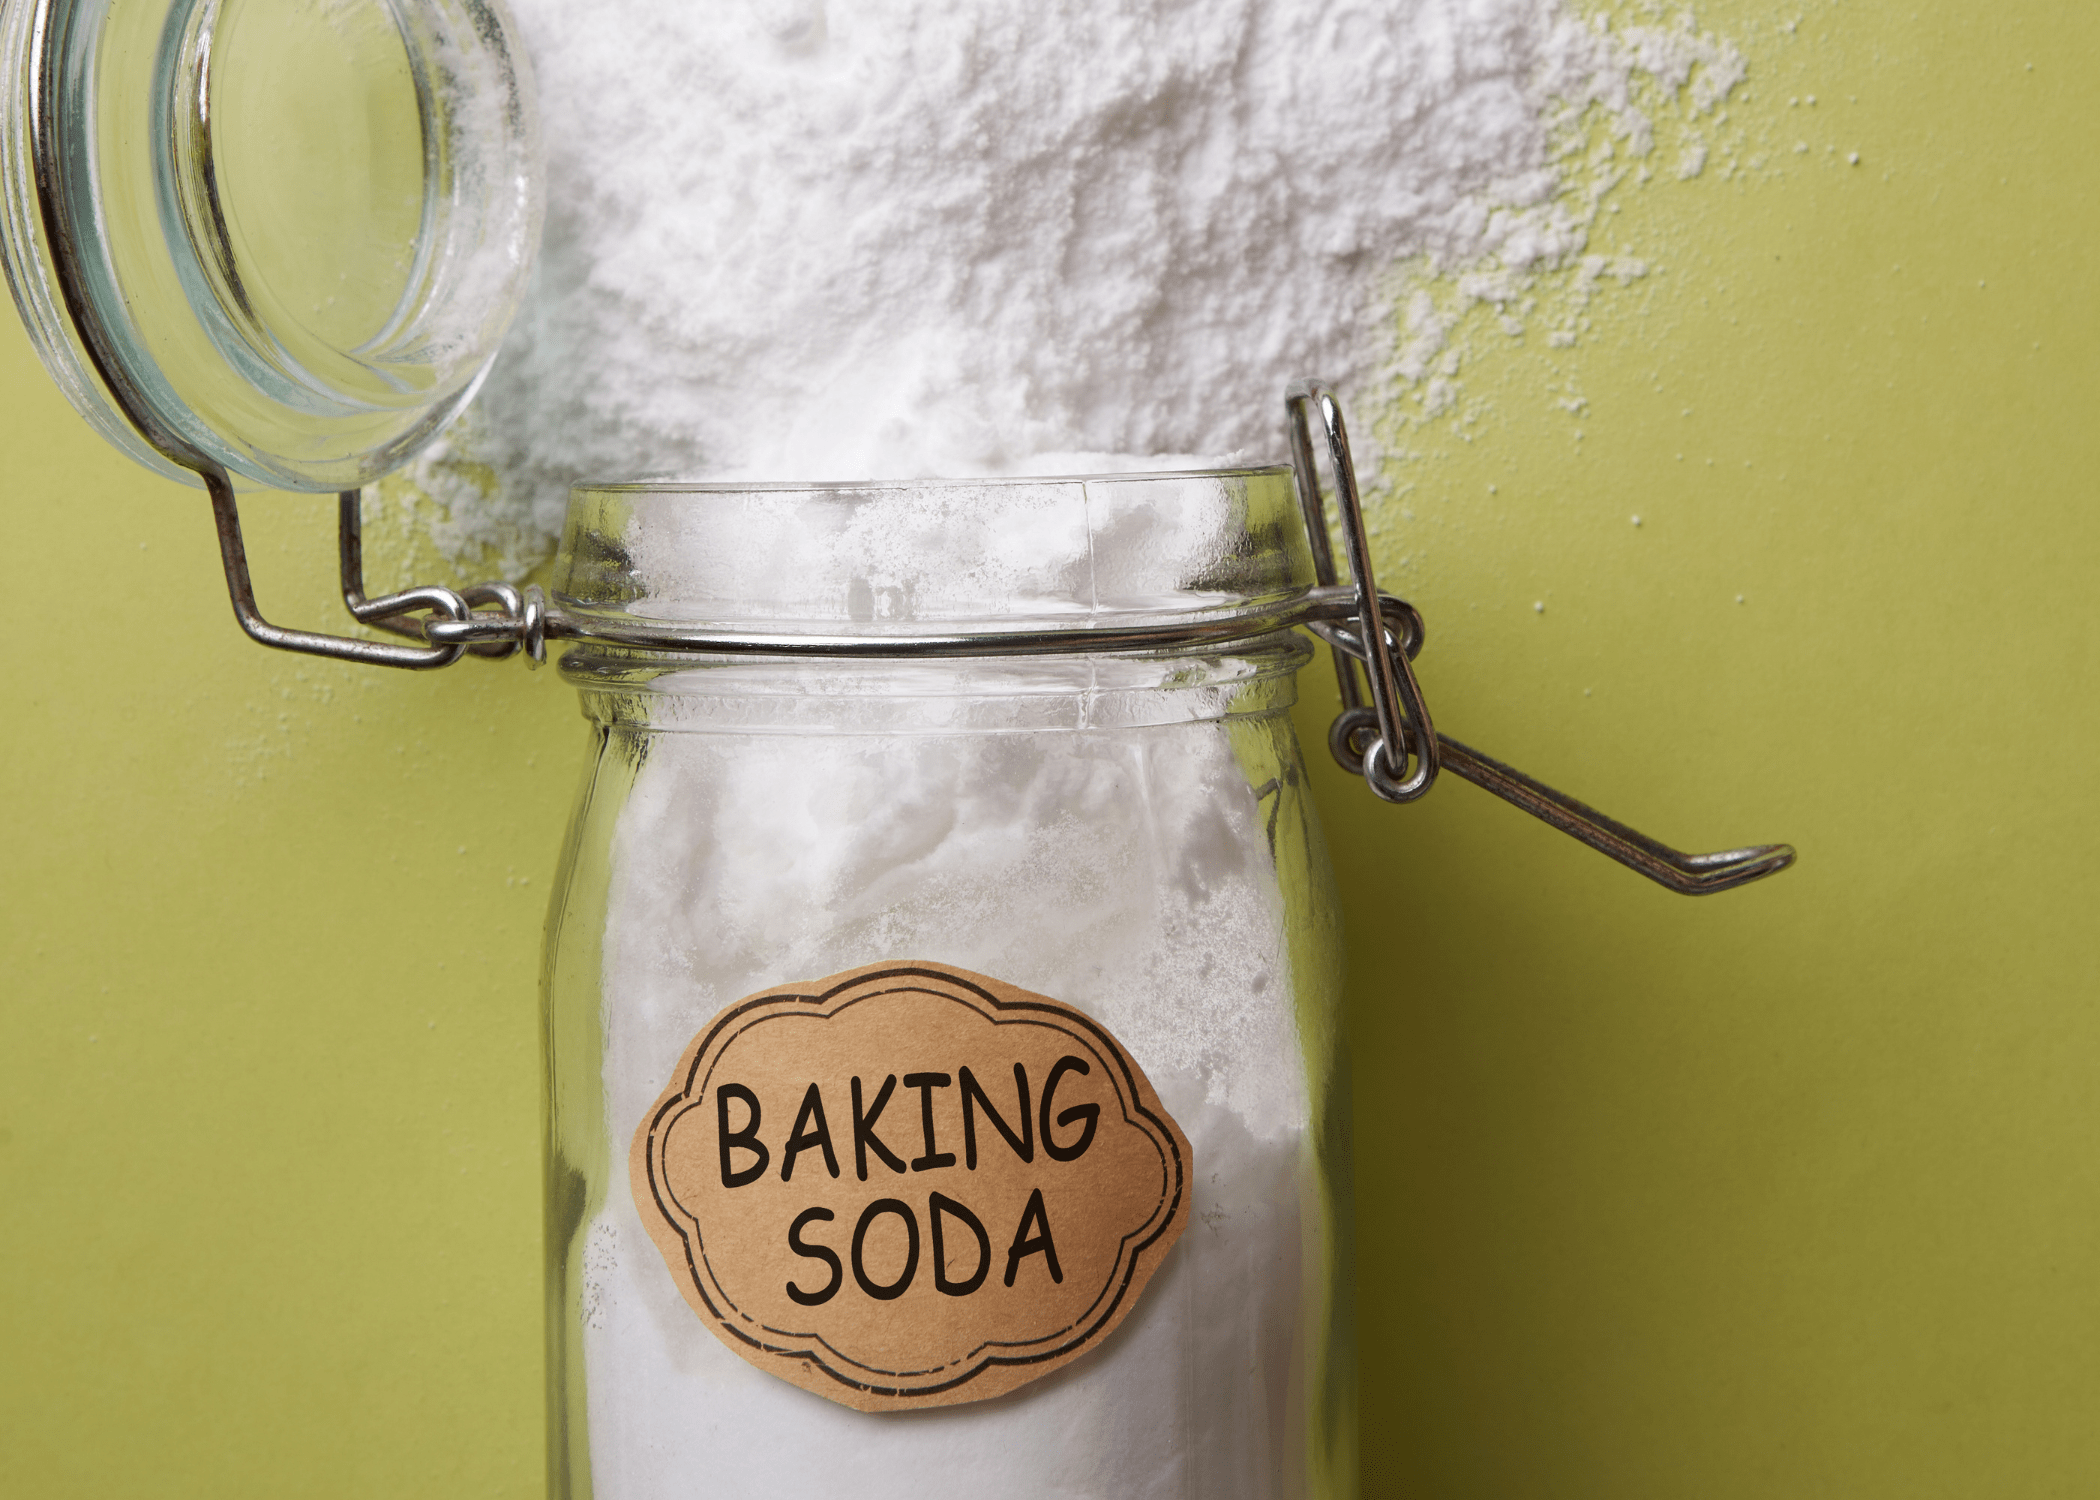 baking soda in jar that is tipped over